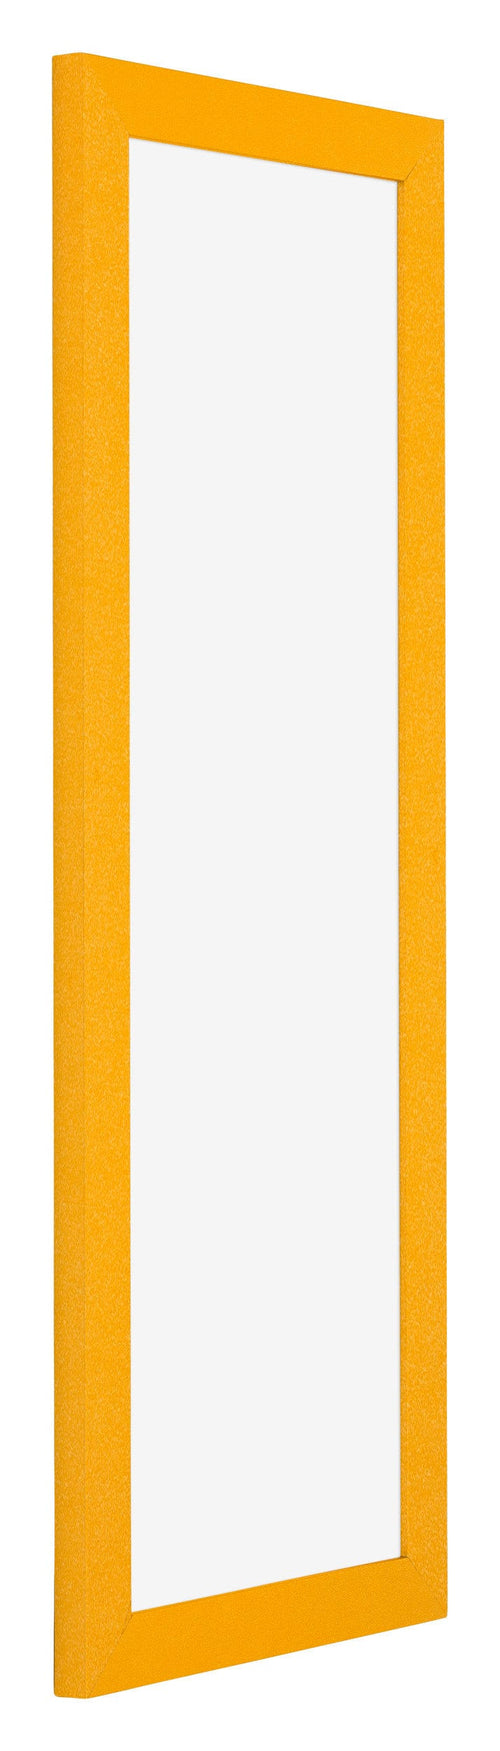 Mura MDF Photo Frame 20x60 Yellow Front Oblique | Yourdecoration.com